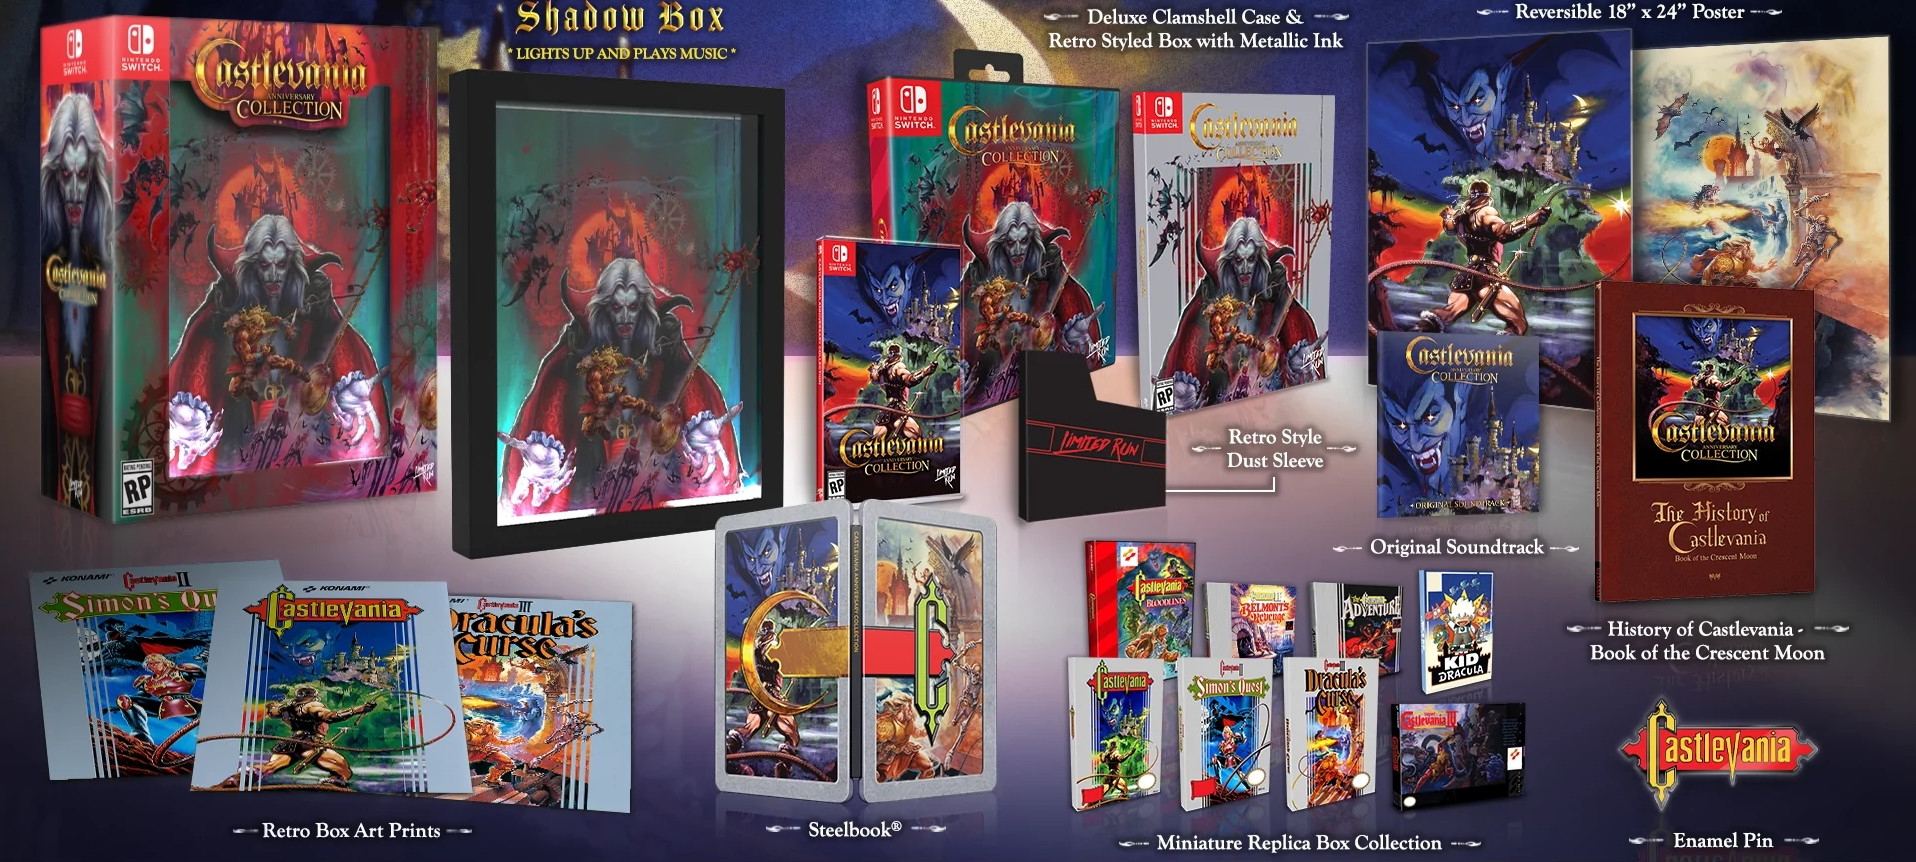 Castlevania - Anniversary Collection Ultimate Edition (Limited Run Games) kopen?